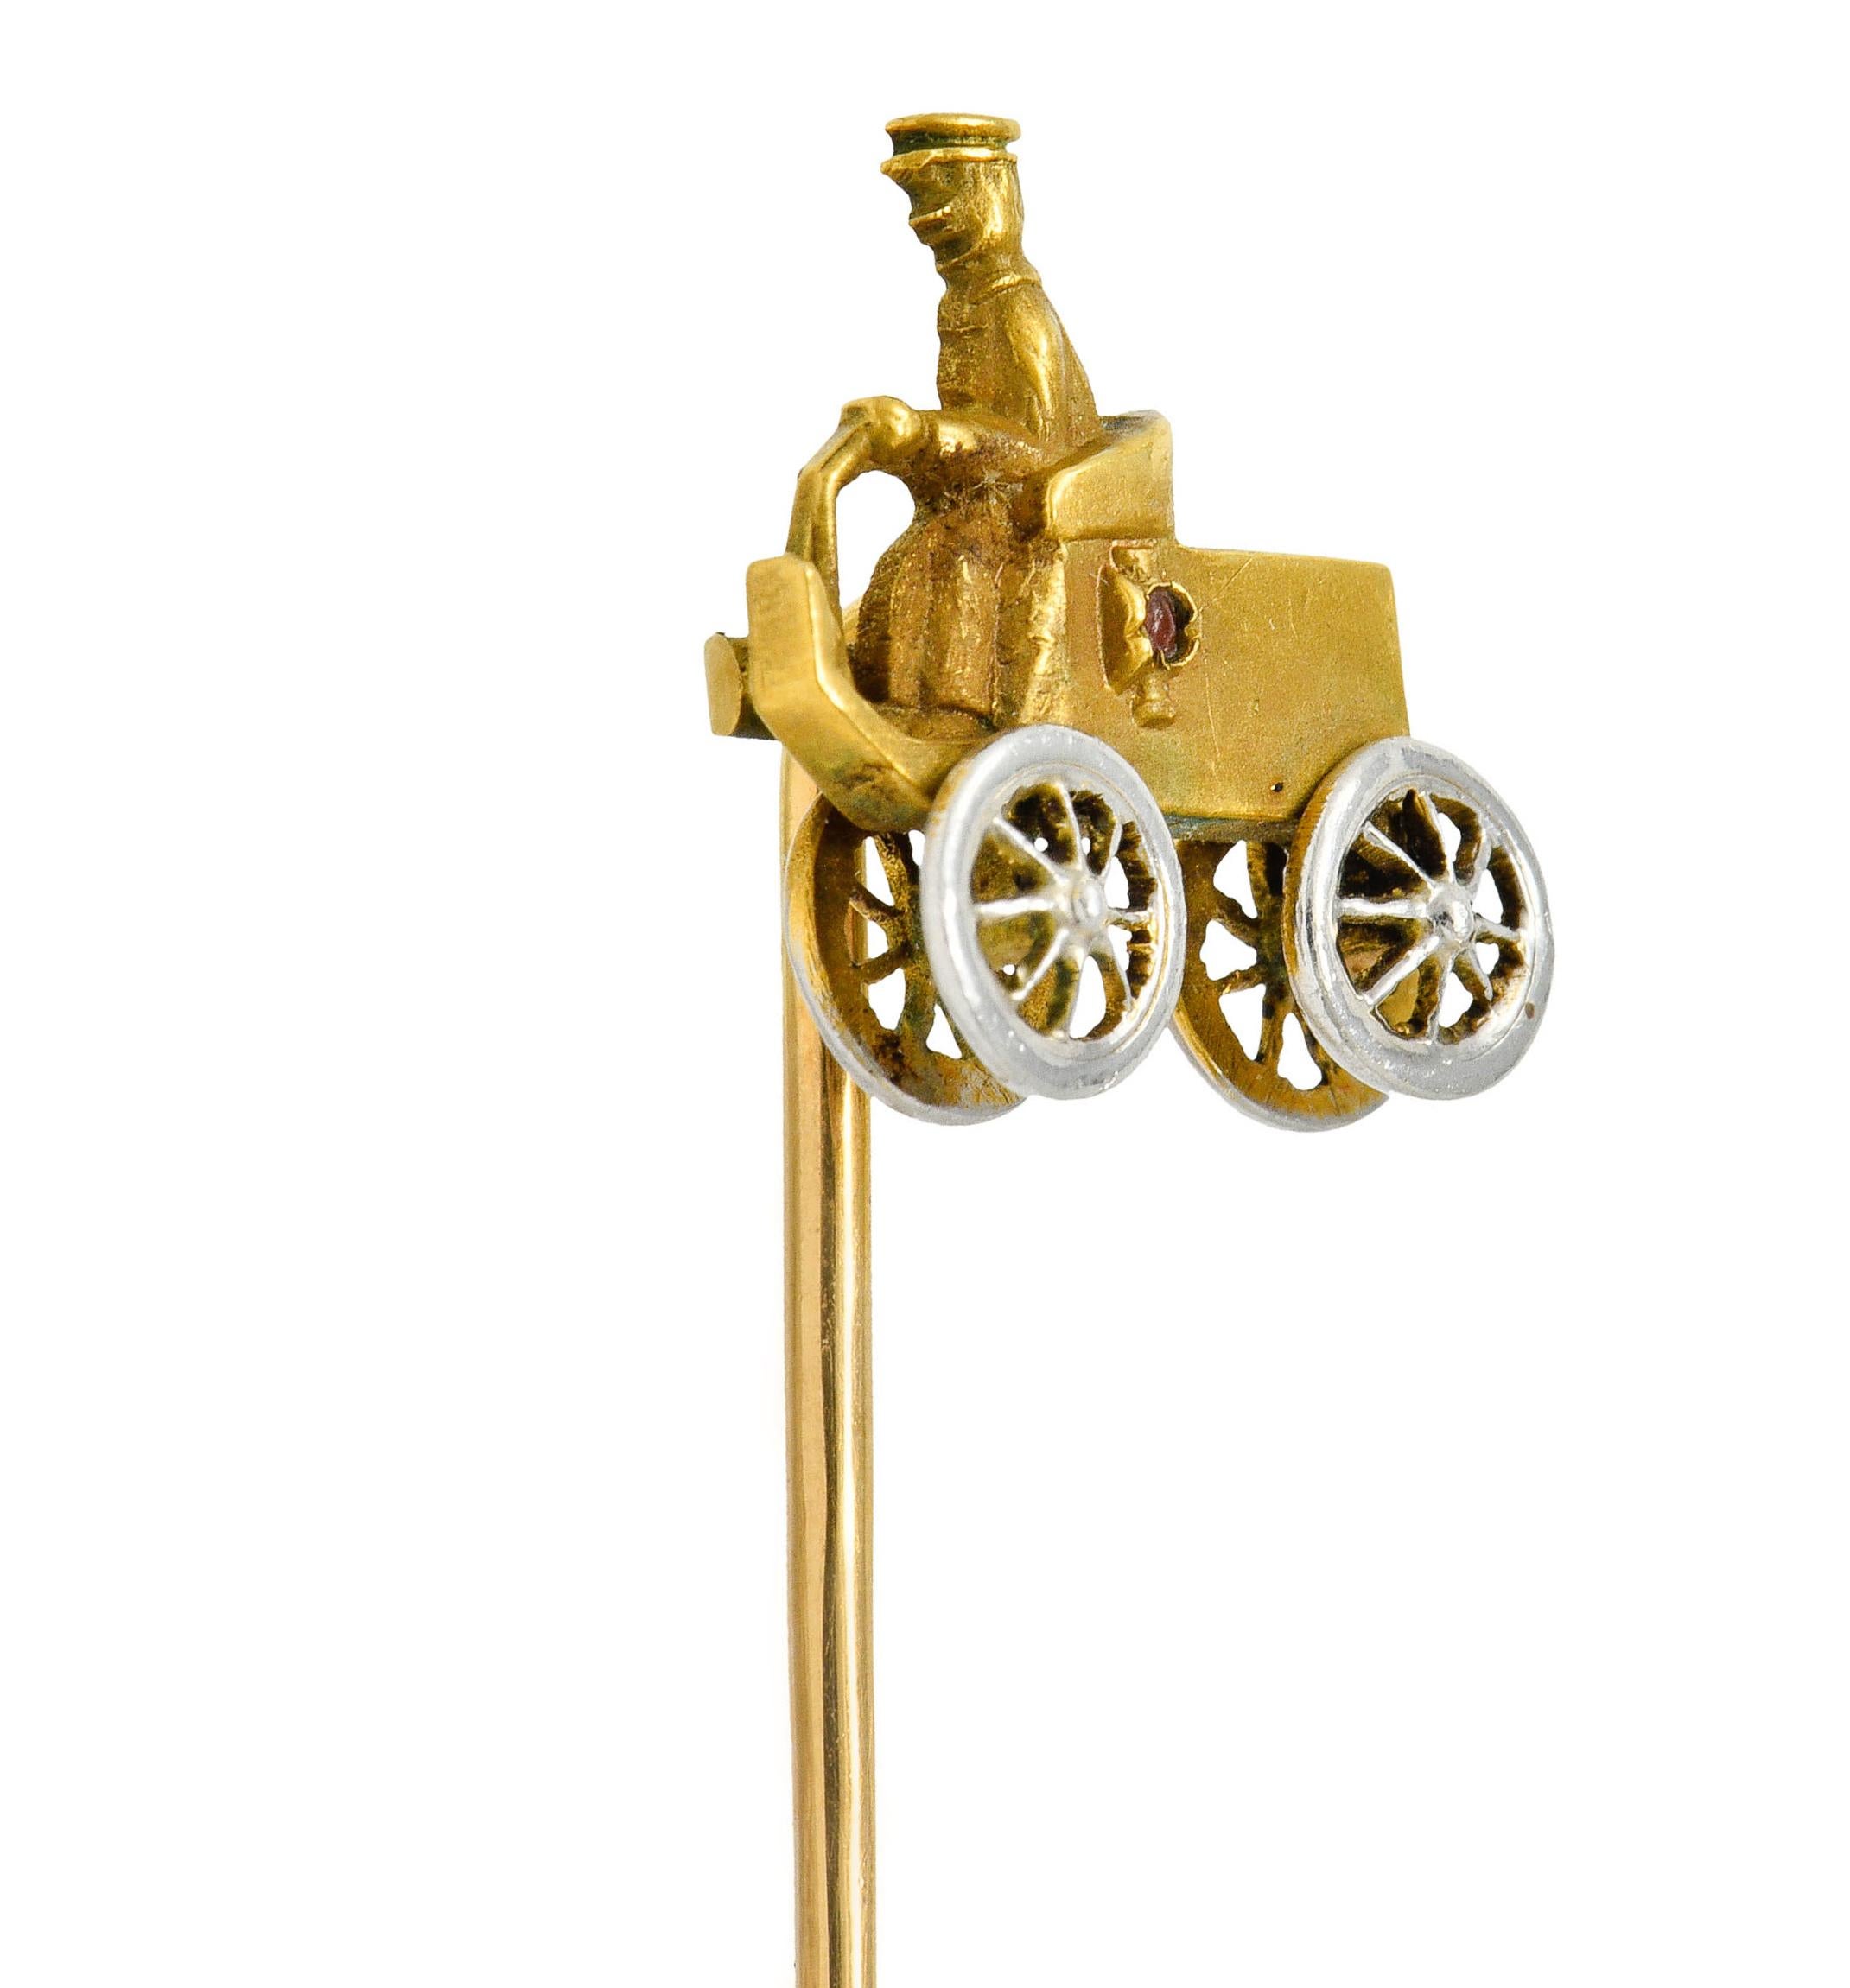 Edwardian Platinum-Topped 14 Karat Gold Antique Car Stickpin In Excellent Condition For Sale In Philadelphia, PA